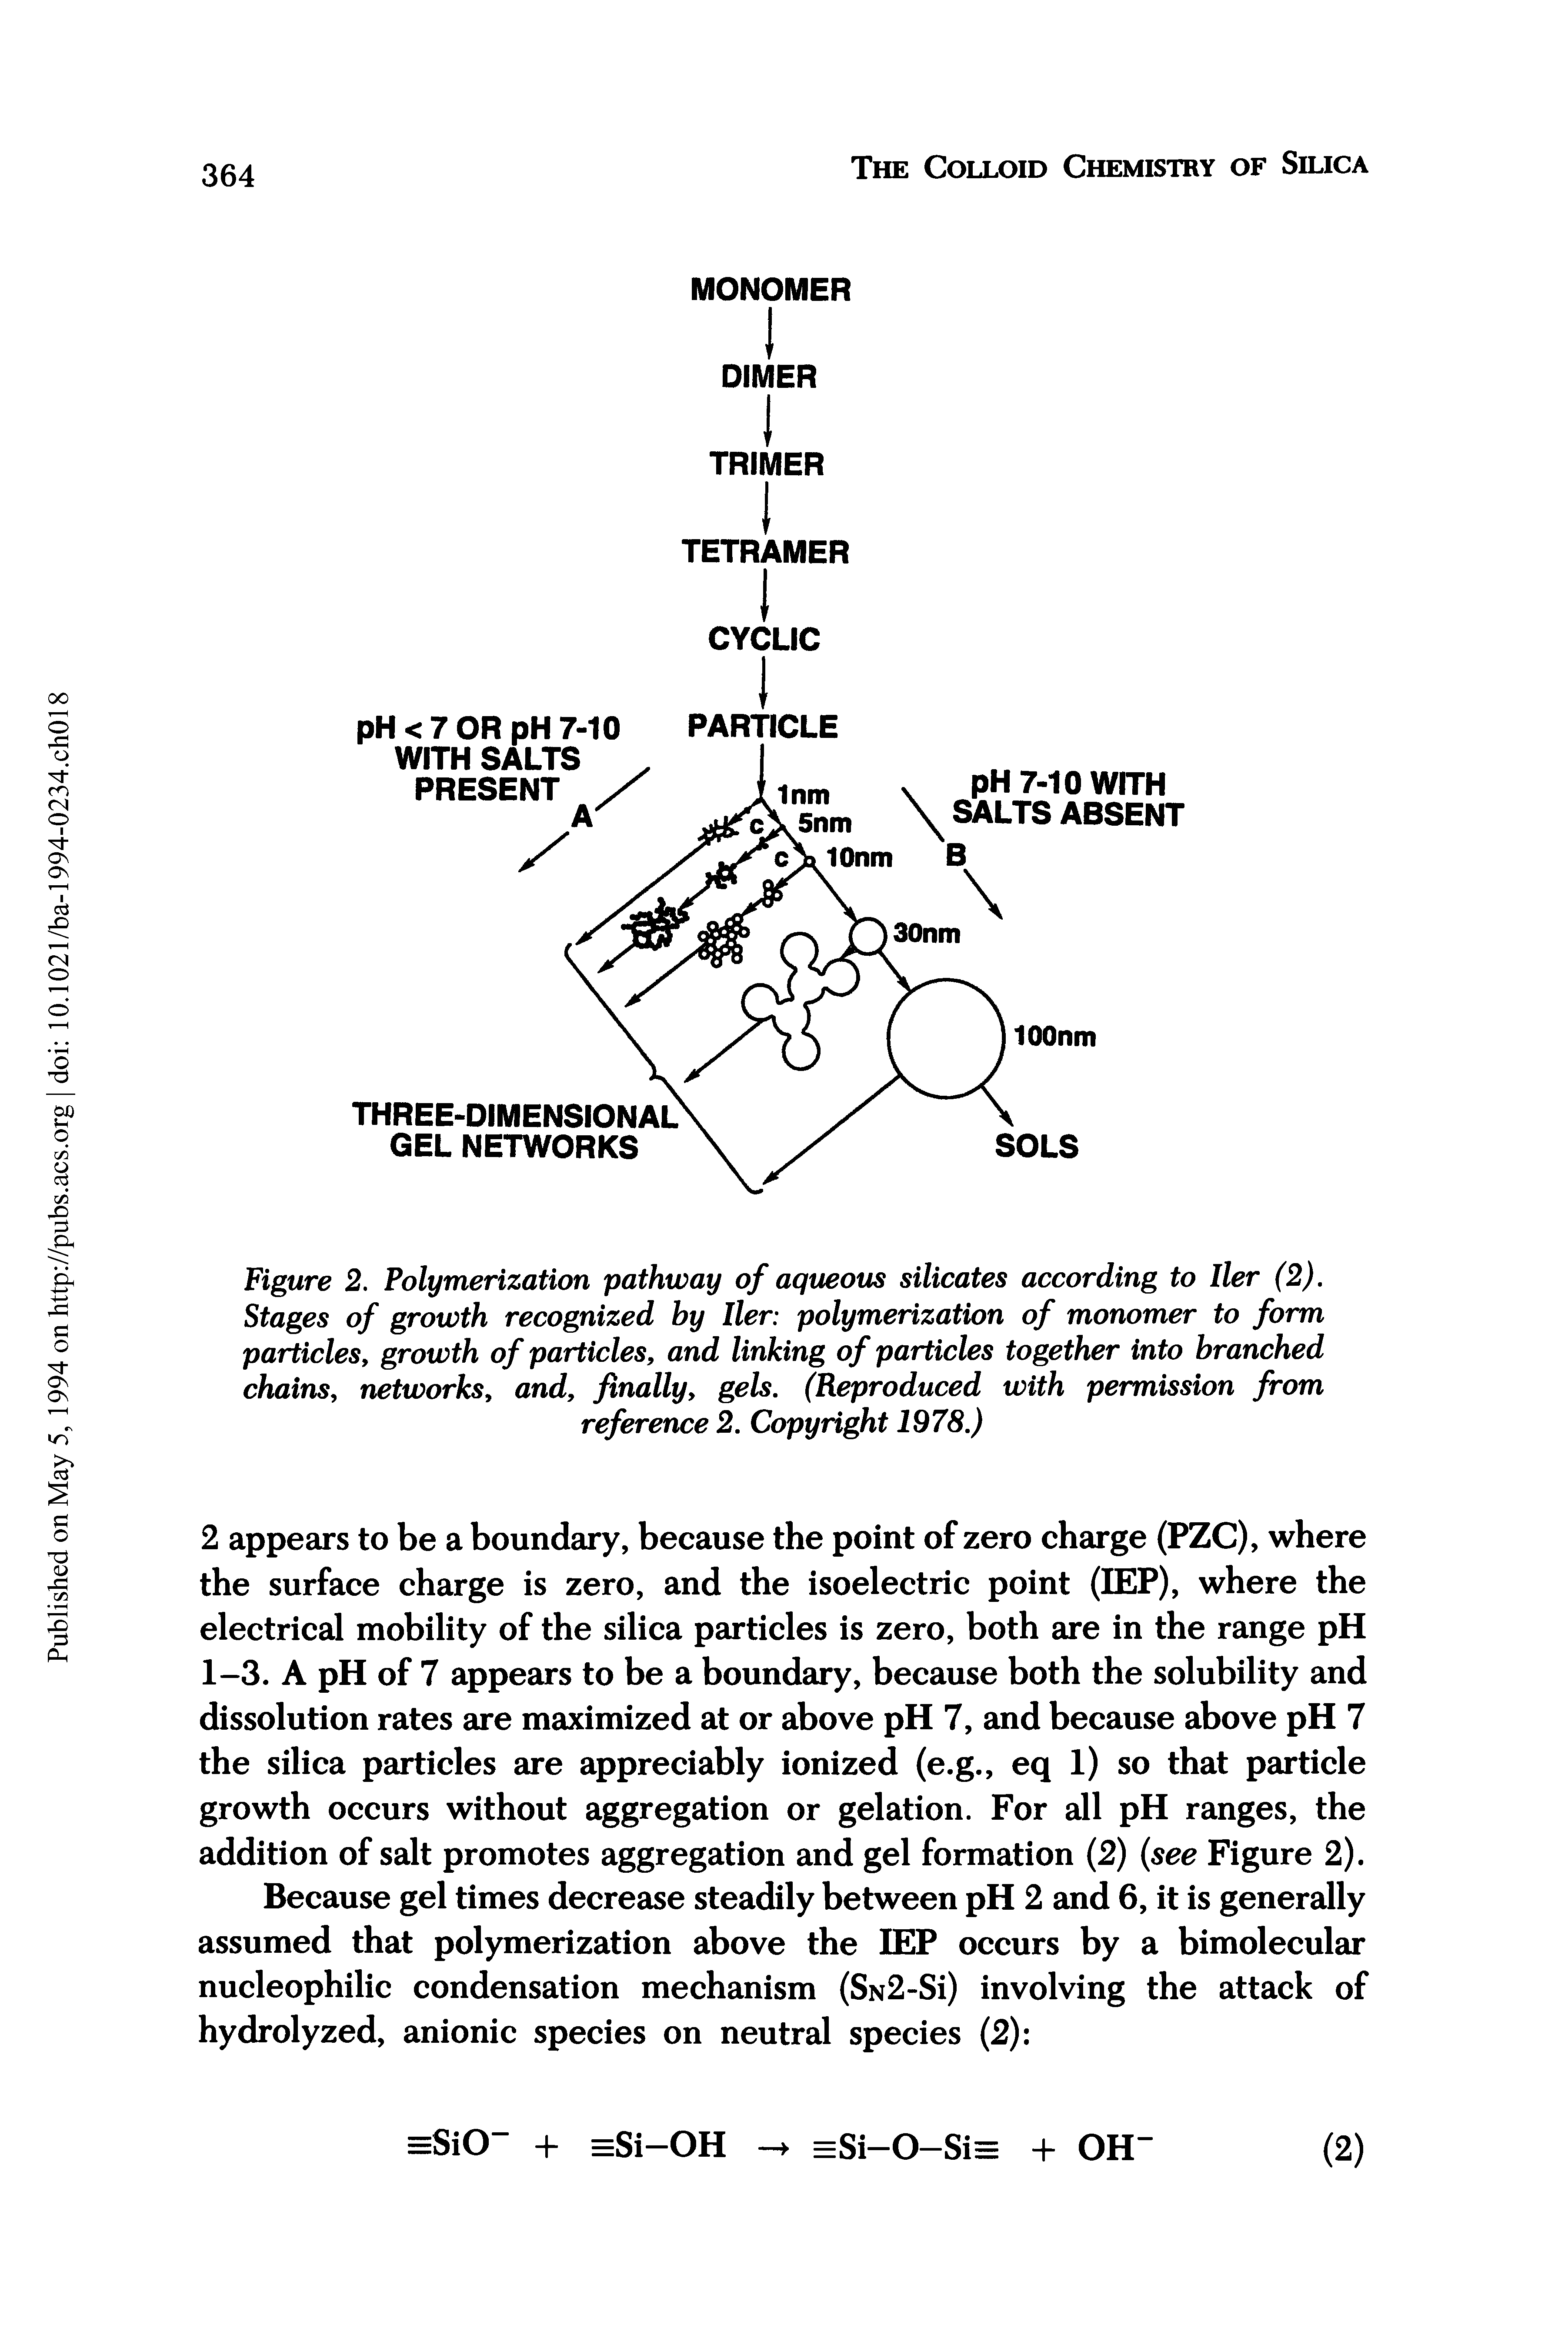 Figure 2. Polymerization pathway of aqueous silicates according to Iler (2). Stages of growth recognized by Iler polymerization of monomer to form particles, growth of particles, and linking of particles together into branched chains, networks, and, finally, gels. (Reproduced with permission from reference 2. Copyright 1978.)...